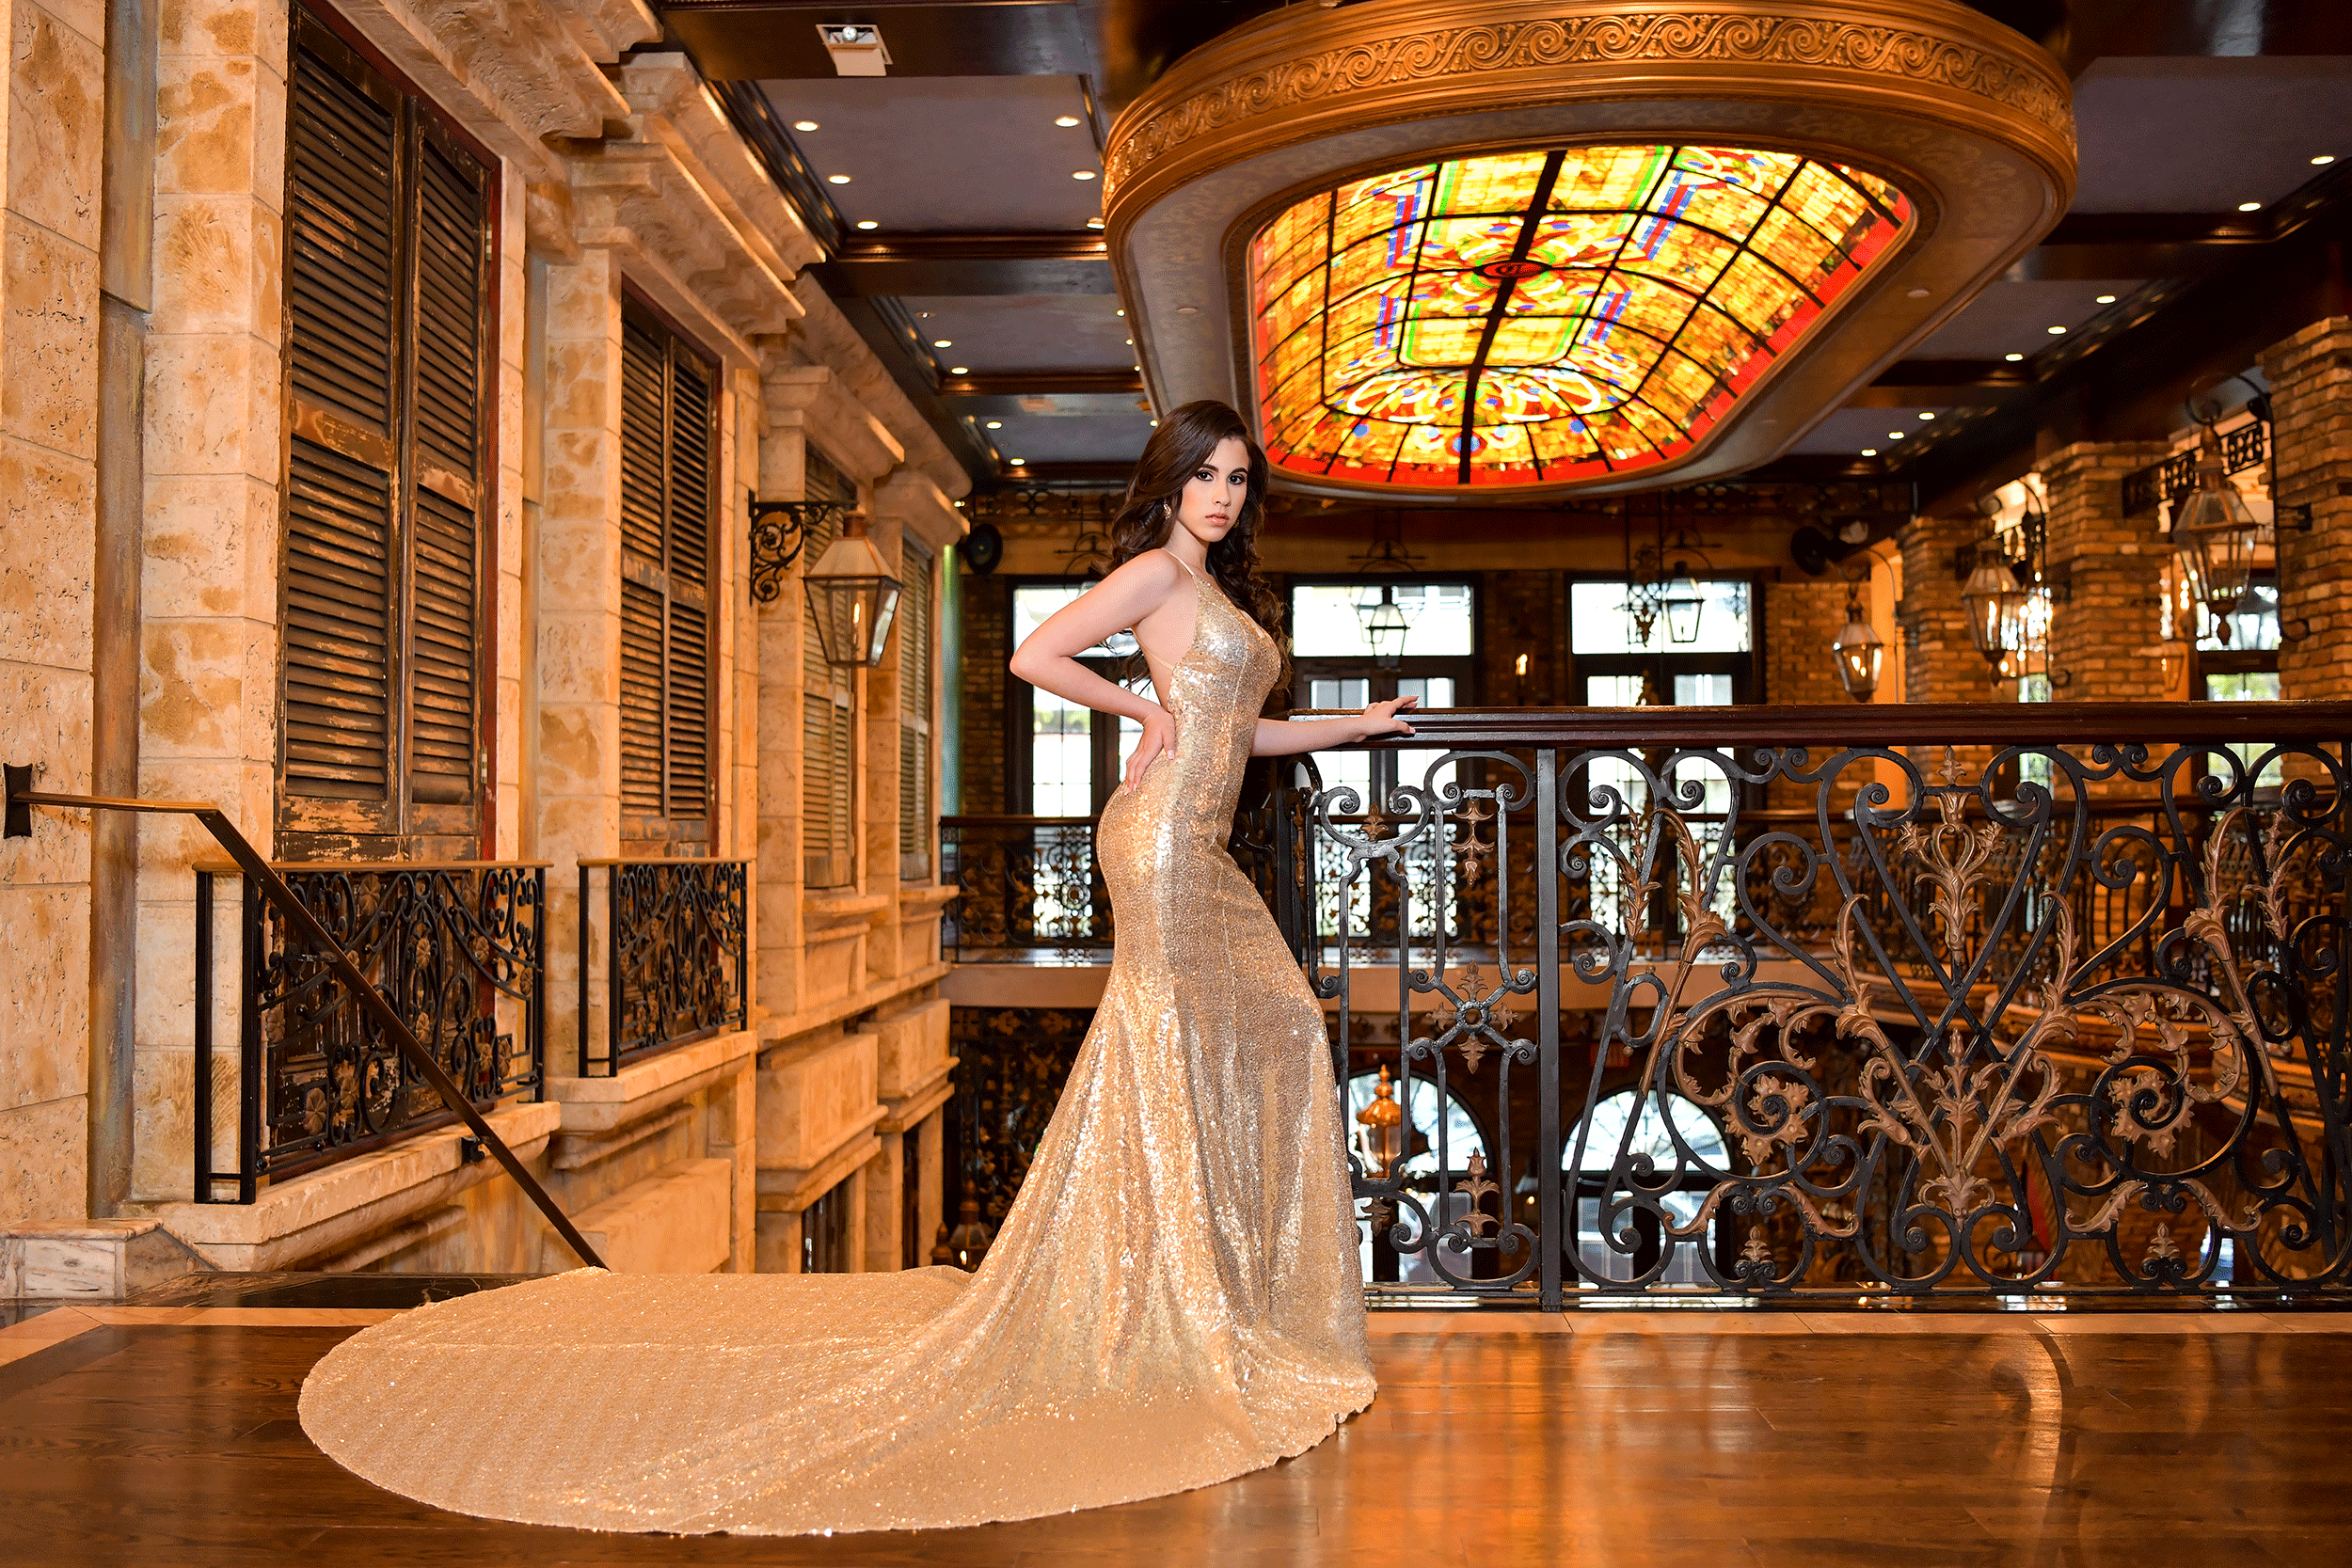 Quinceañera at the Cruz building in a gold dress Photo by Quinceanera Photo Studio.